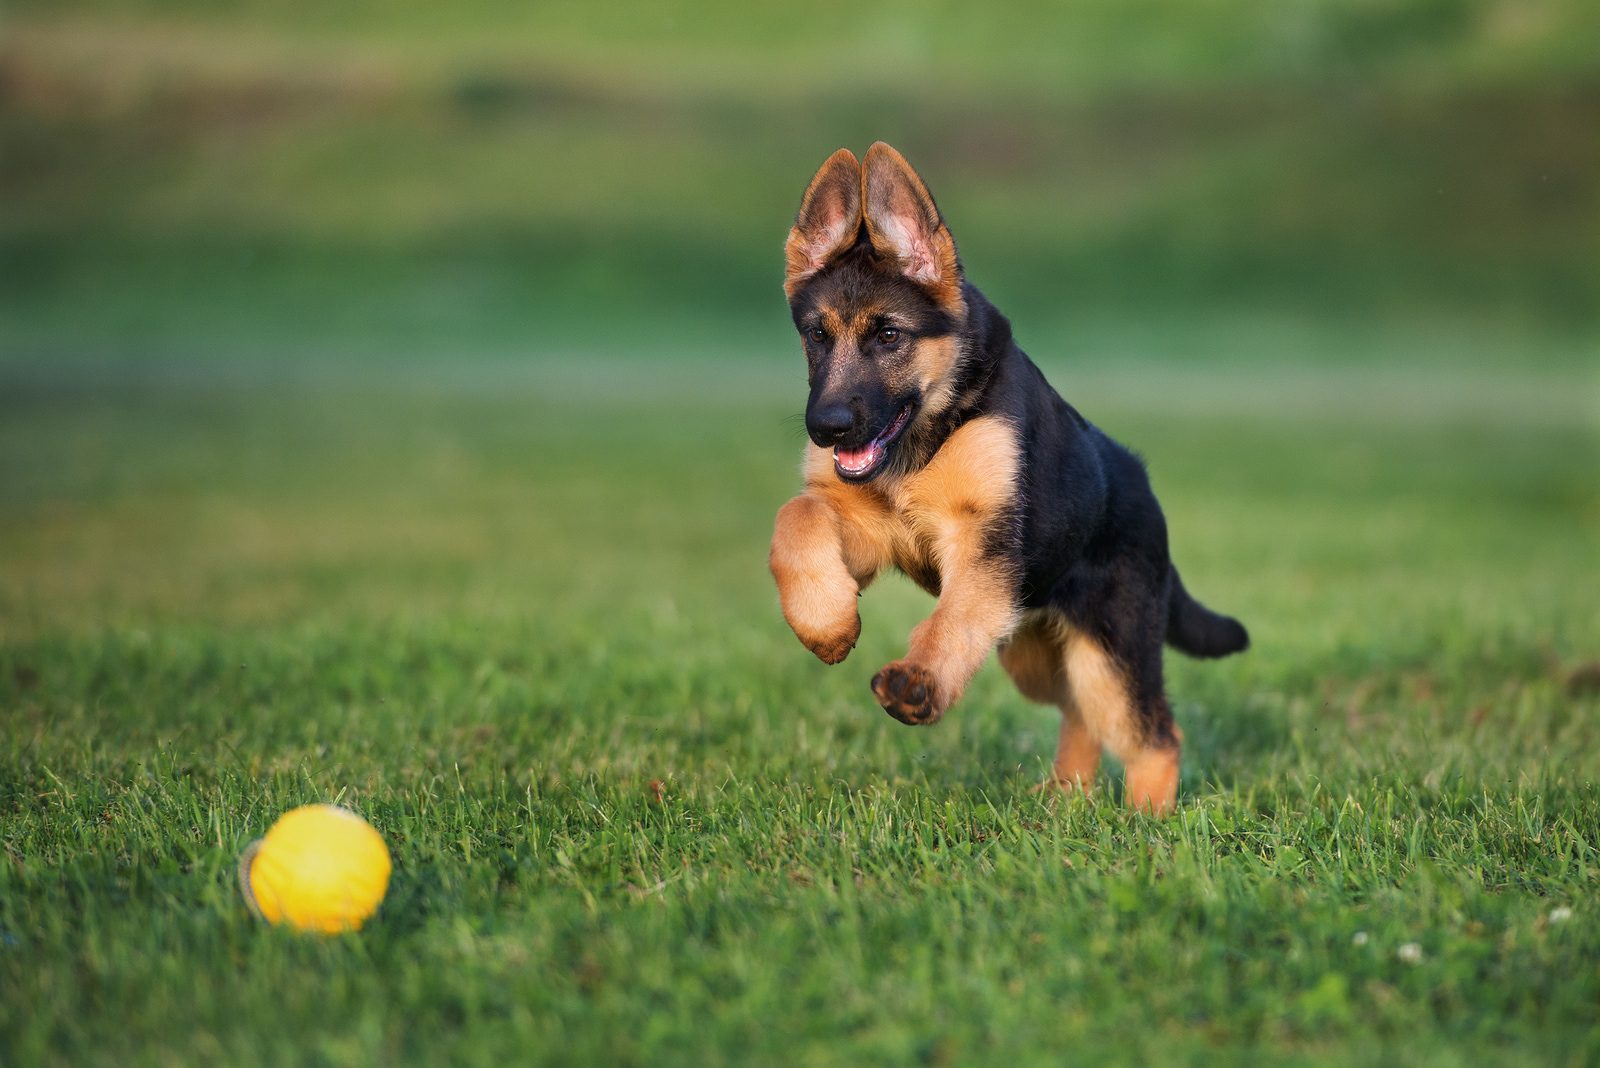 Parvovirus Infection in Dogs: Symptoms and Treatment